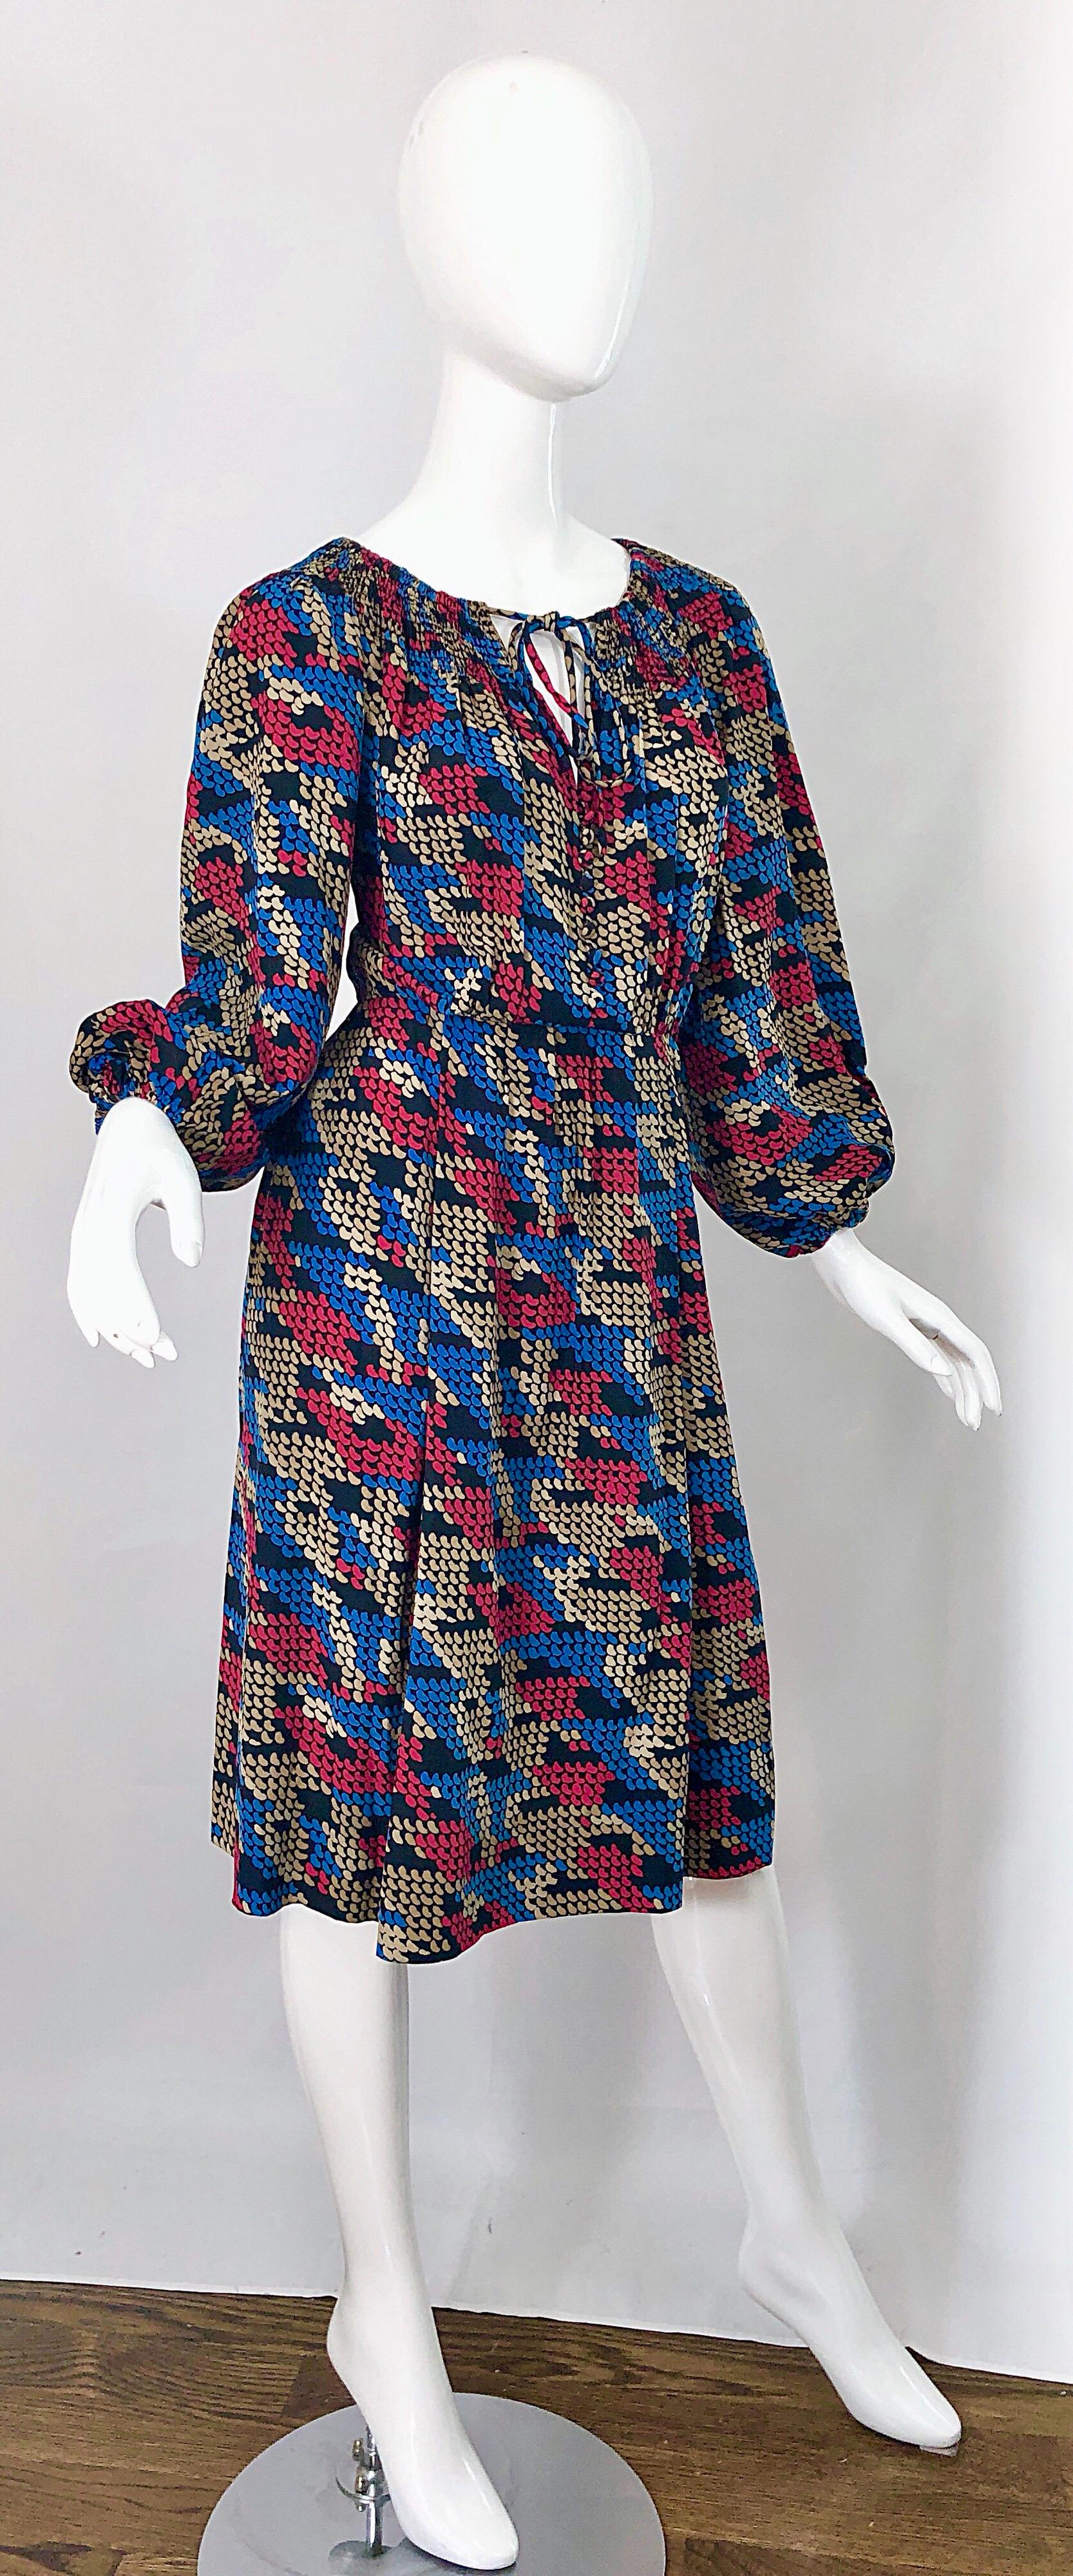 Givenchy Haute Couture 1970s Exaggerated Houndstooth Bishop Sleeve Vintage Dress In Excellent Condition For Sale In San Diego, CA